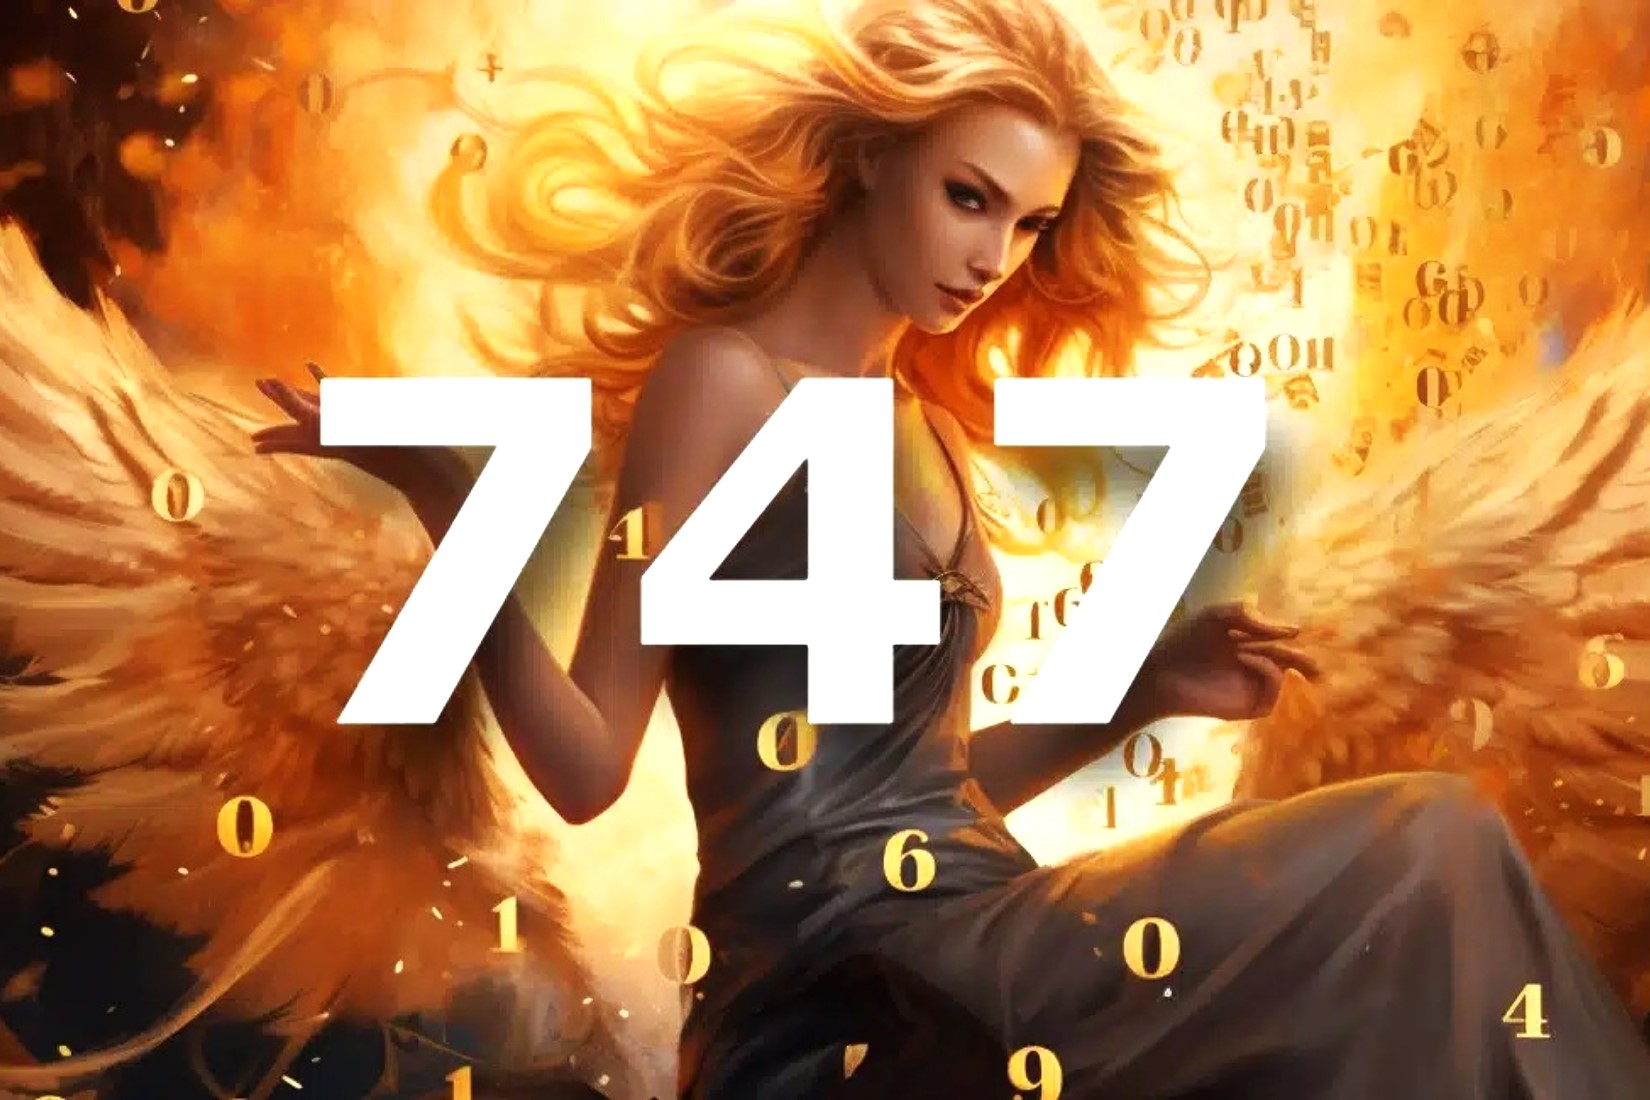 The Mysterious Significance Behind The Number 747 Will Leave You Astonished!